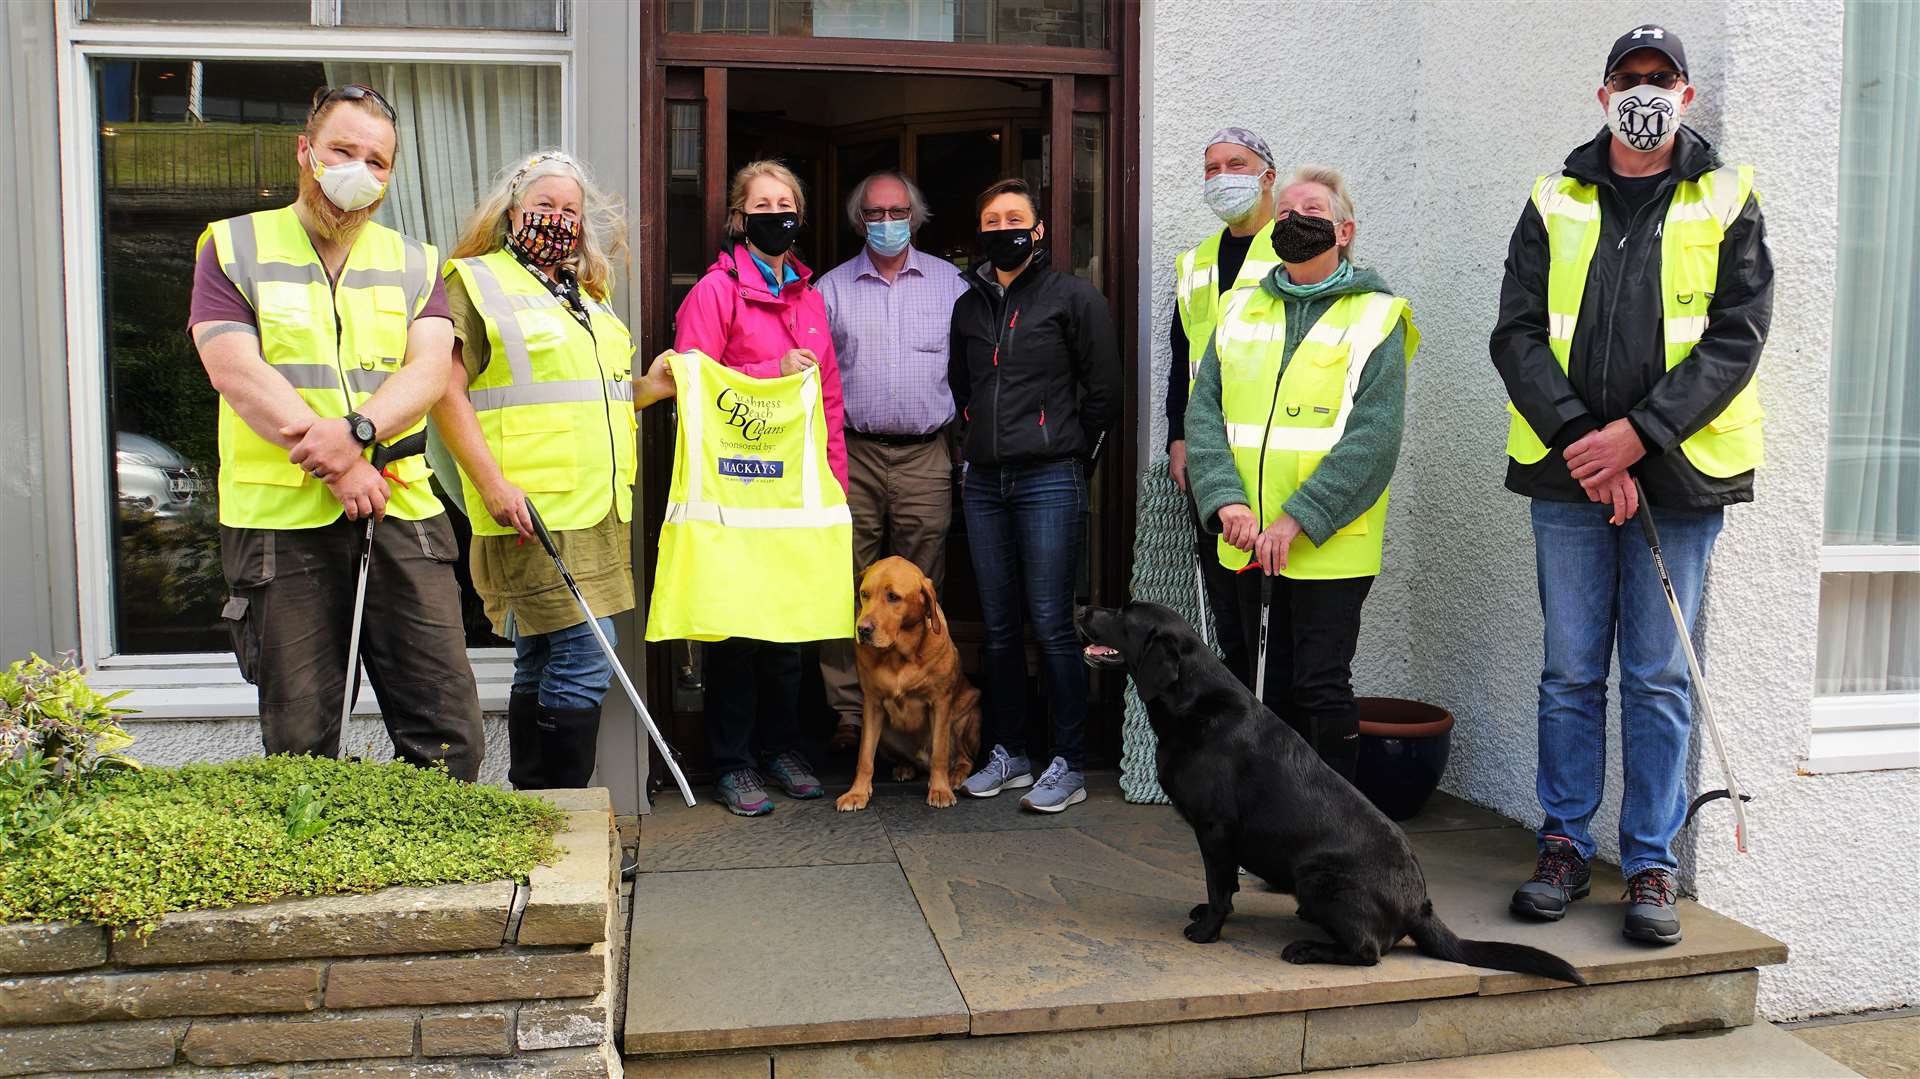 Outside Mackays Hotel on Union Street in Wick are from left Andy and Gabrielle Williams, Ellie, Murray and Jennifer Lamont from Mackays Hotel, Alan and and Dorcas Sinclair, and George Robertson. Hotel dogs Max and Bria are also featured. Pictures: DGS